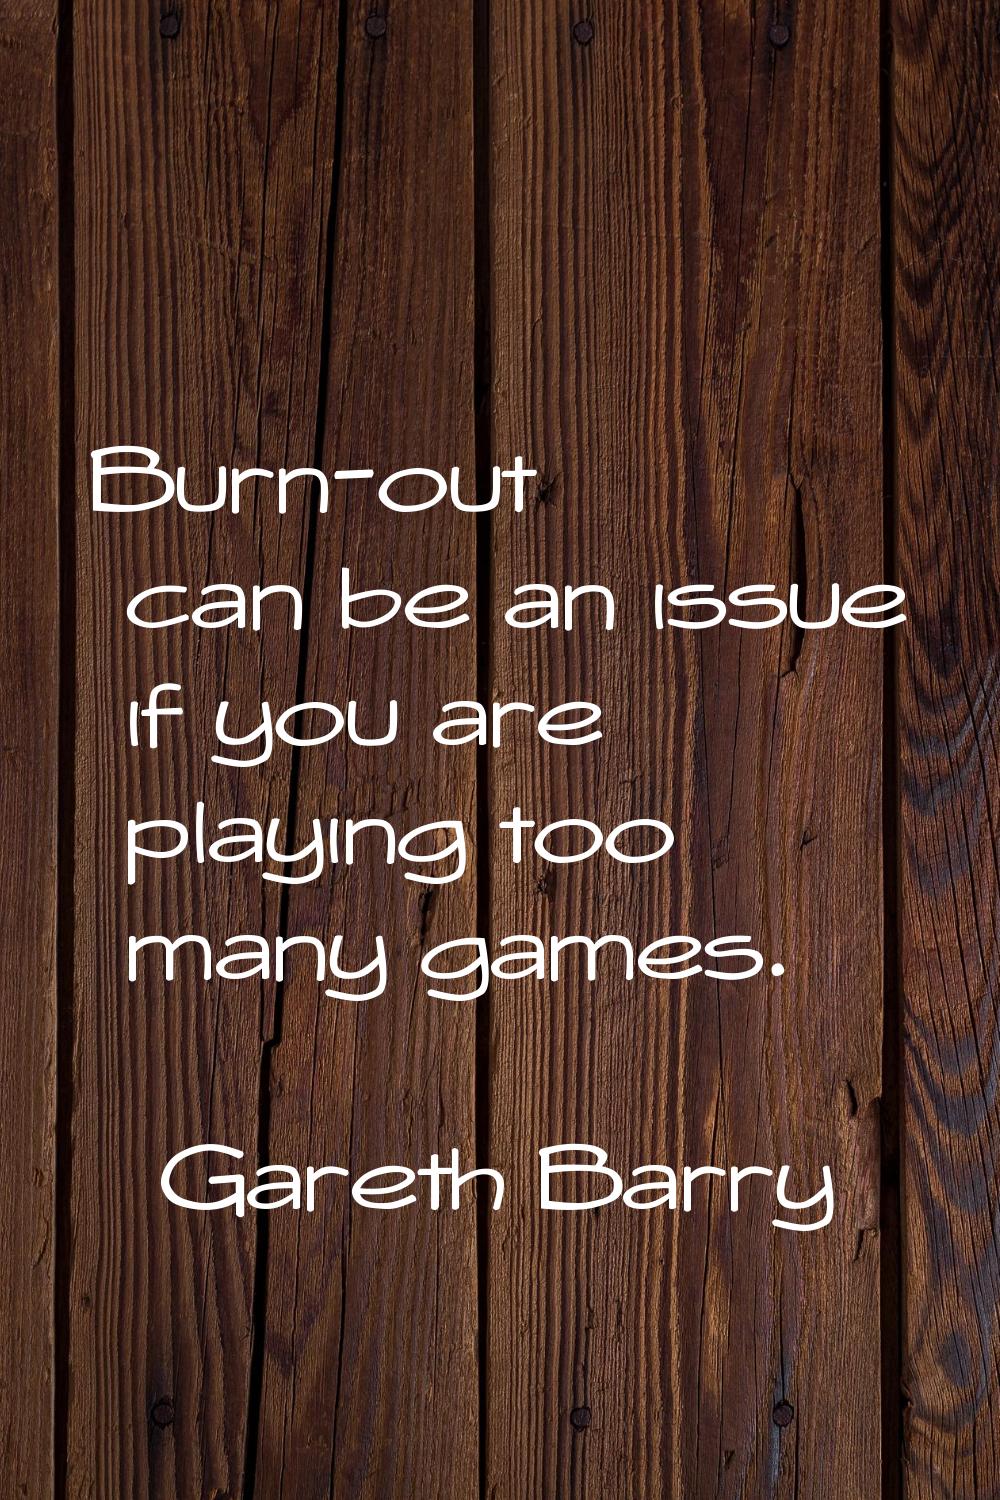 Burn-out can be an issue if you are playing too many games.